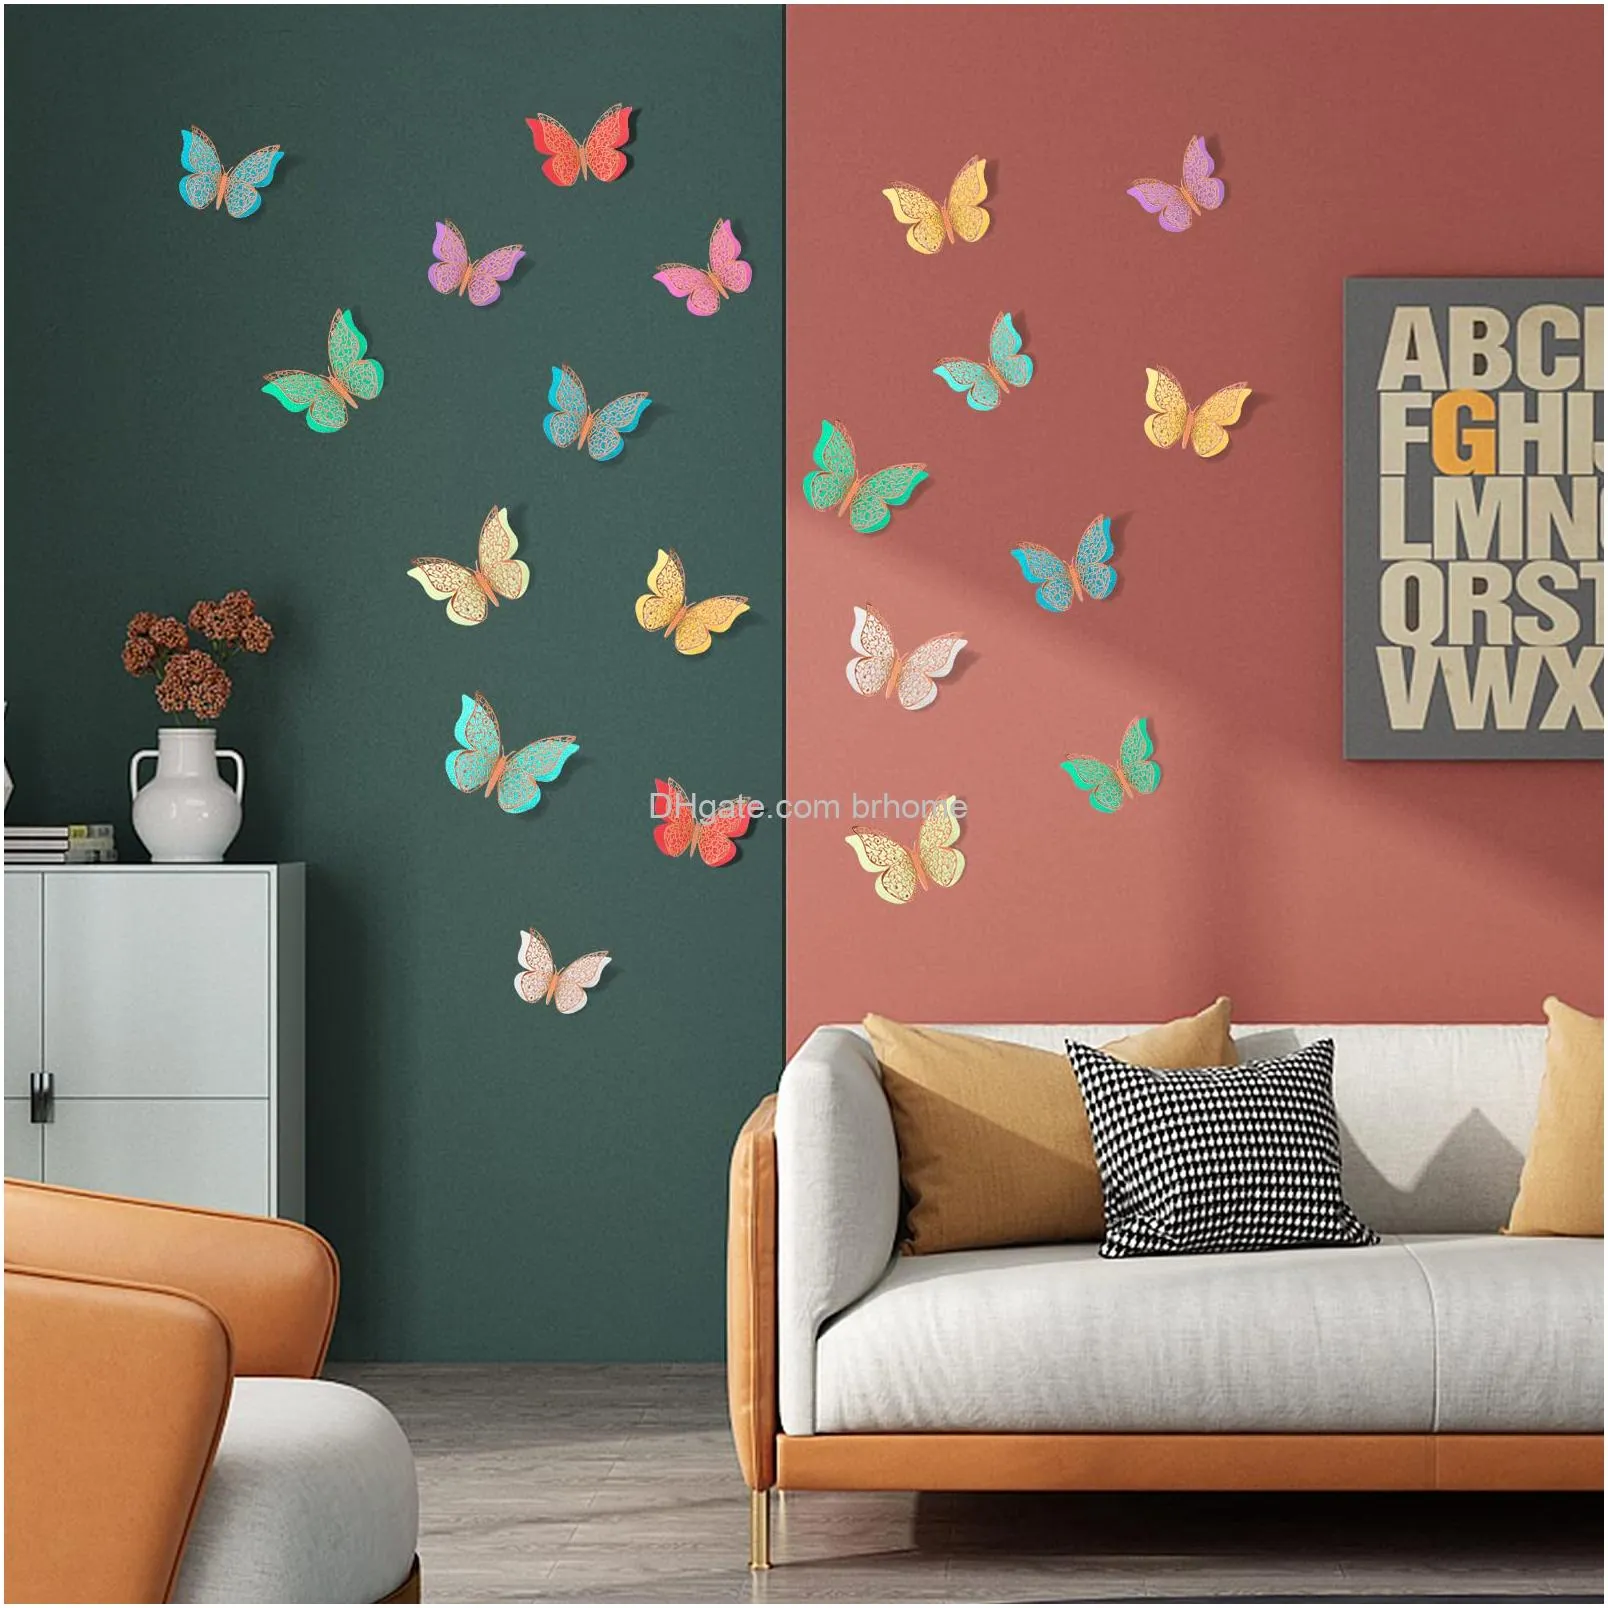 3d butterfly wall decor butterfly decorations double layers wall stickers for party decorations baby show decorations wedding decor room dcor diy gift rose gold